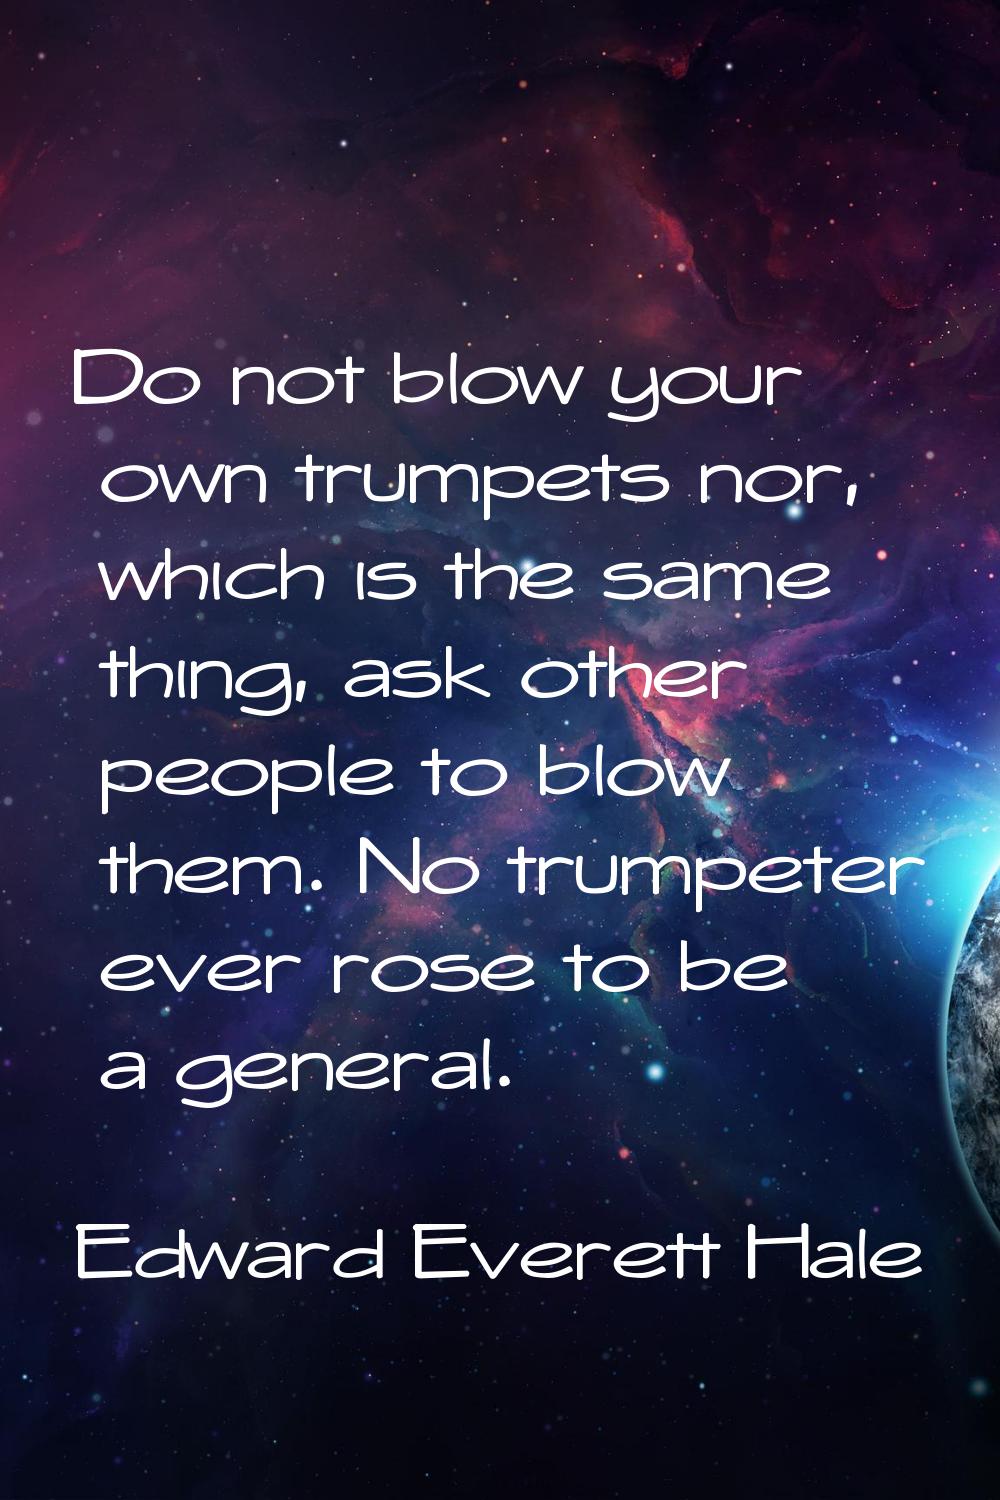 Do not blow your own trumpets nor, which is the same thing, ask other people to blow them. No trump